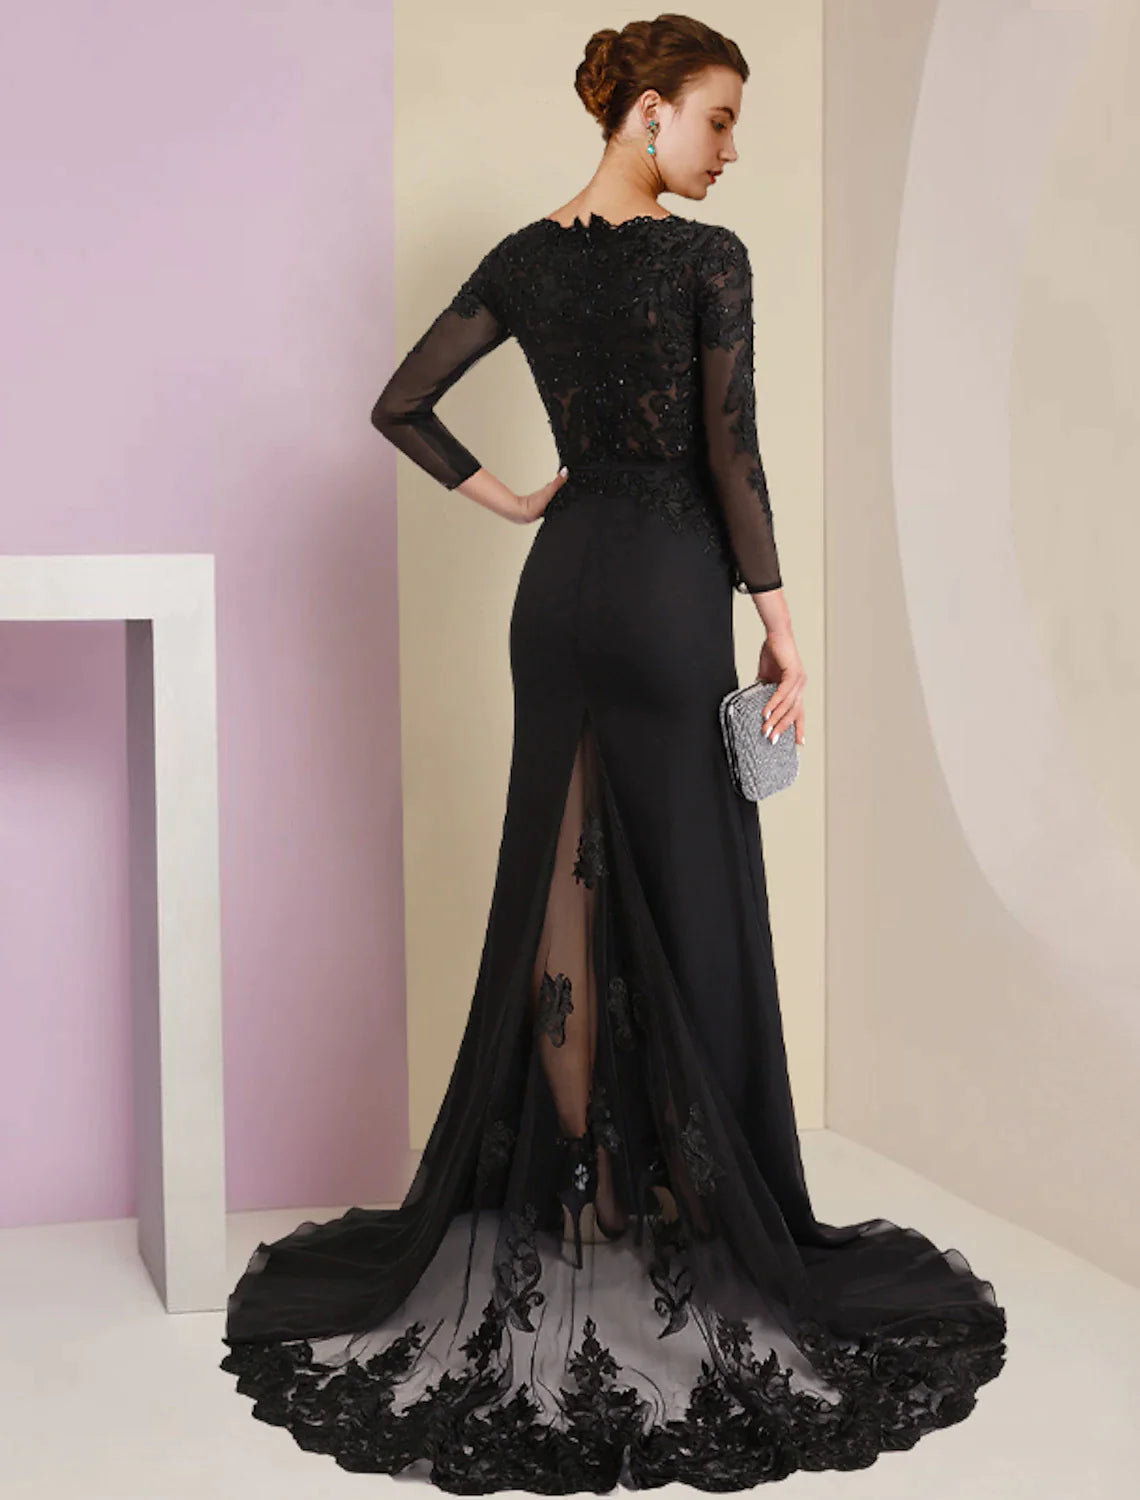 Sheath / Column Mother of the Bride Dress Wedding Guest Vintage Party V Neck Court Train Chiffon Lace Long Sleeve with Sequin